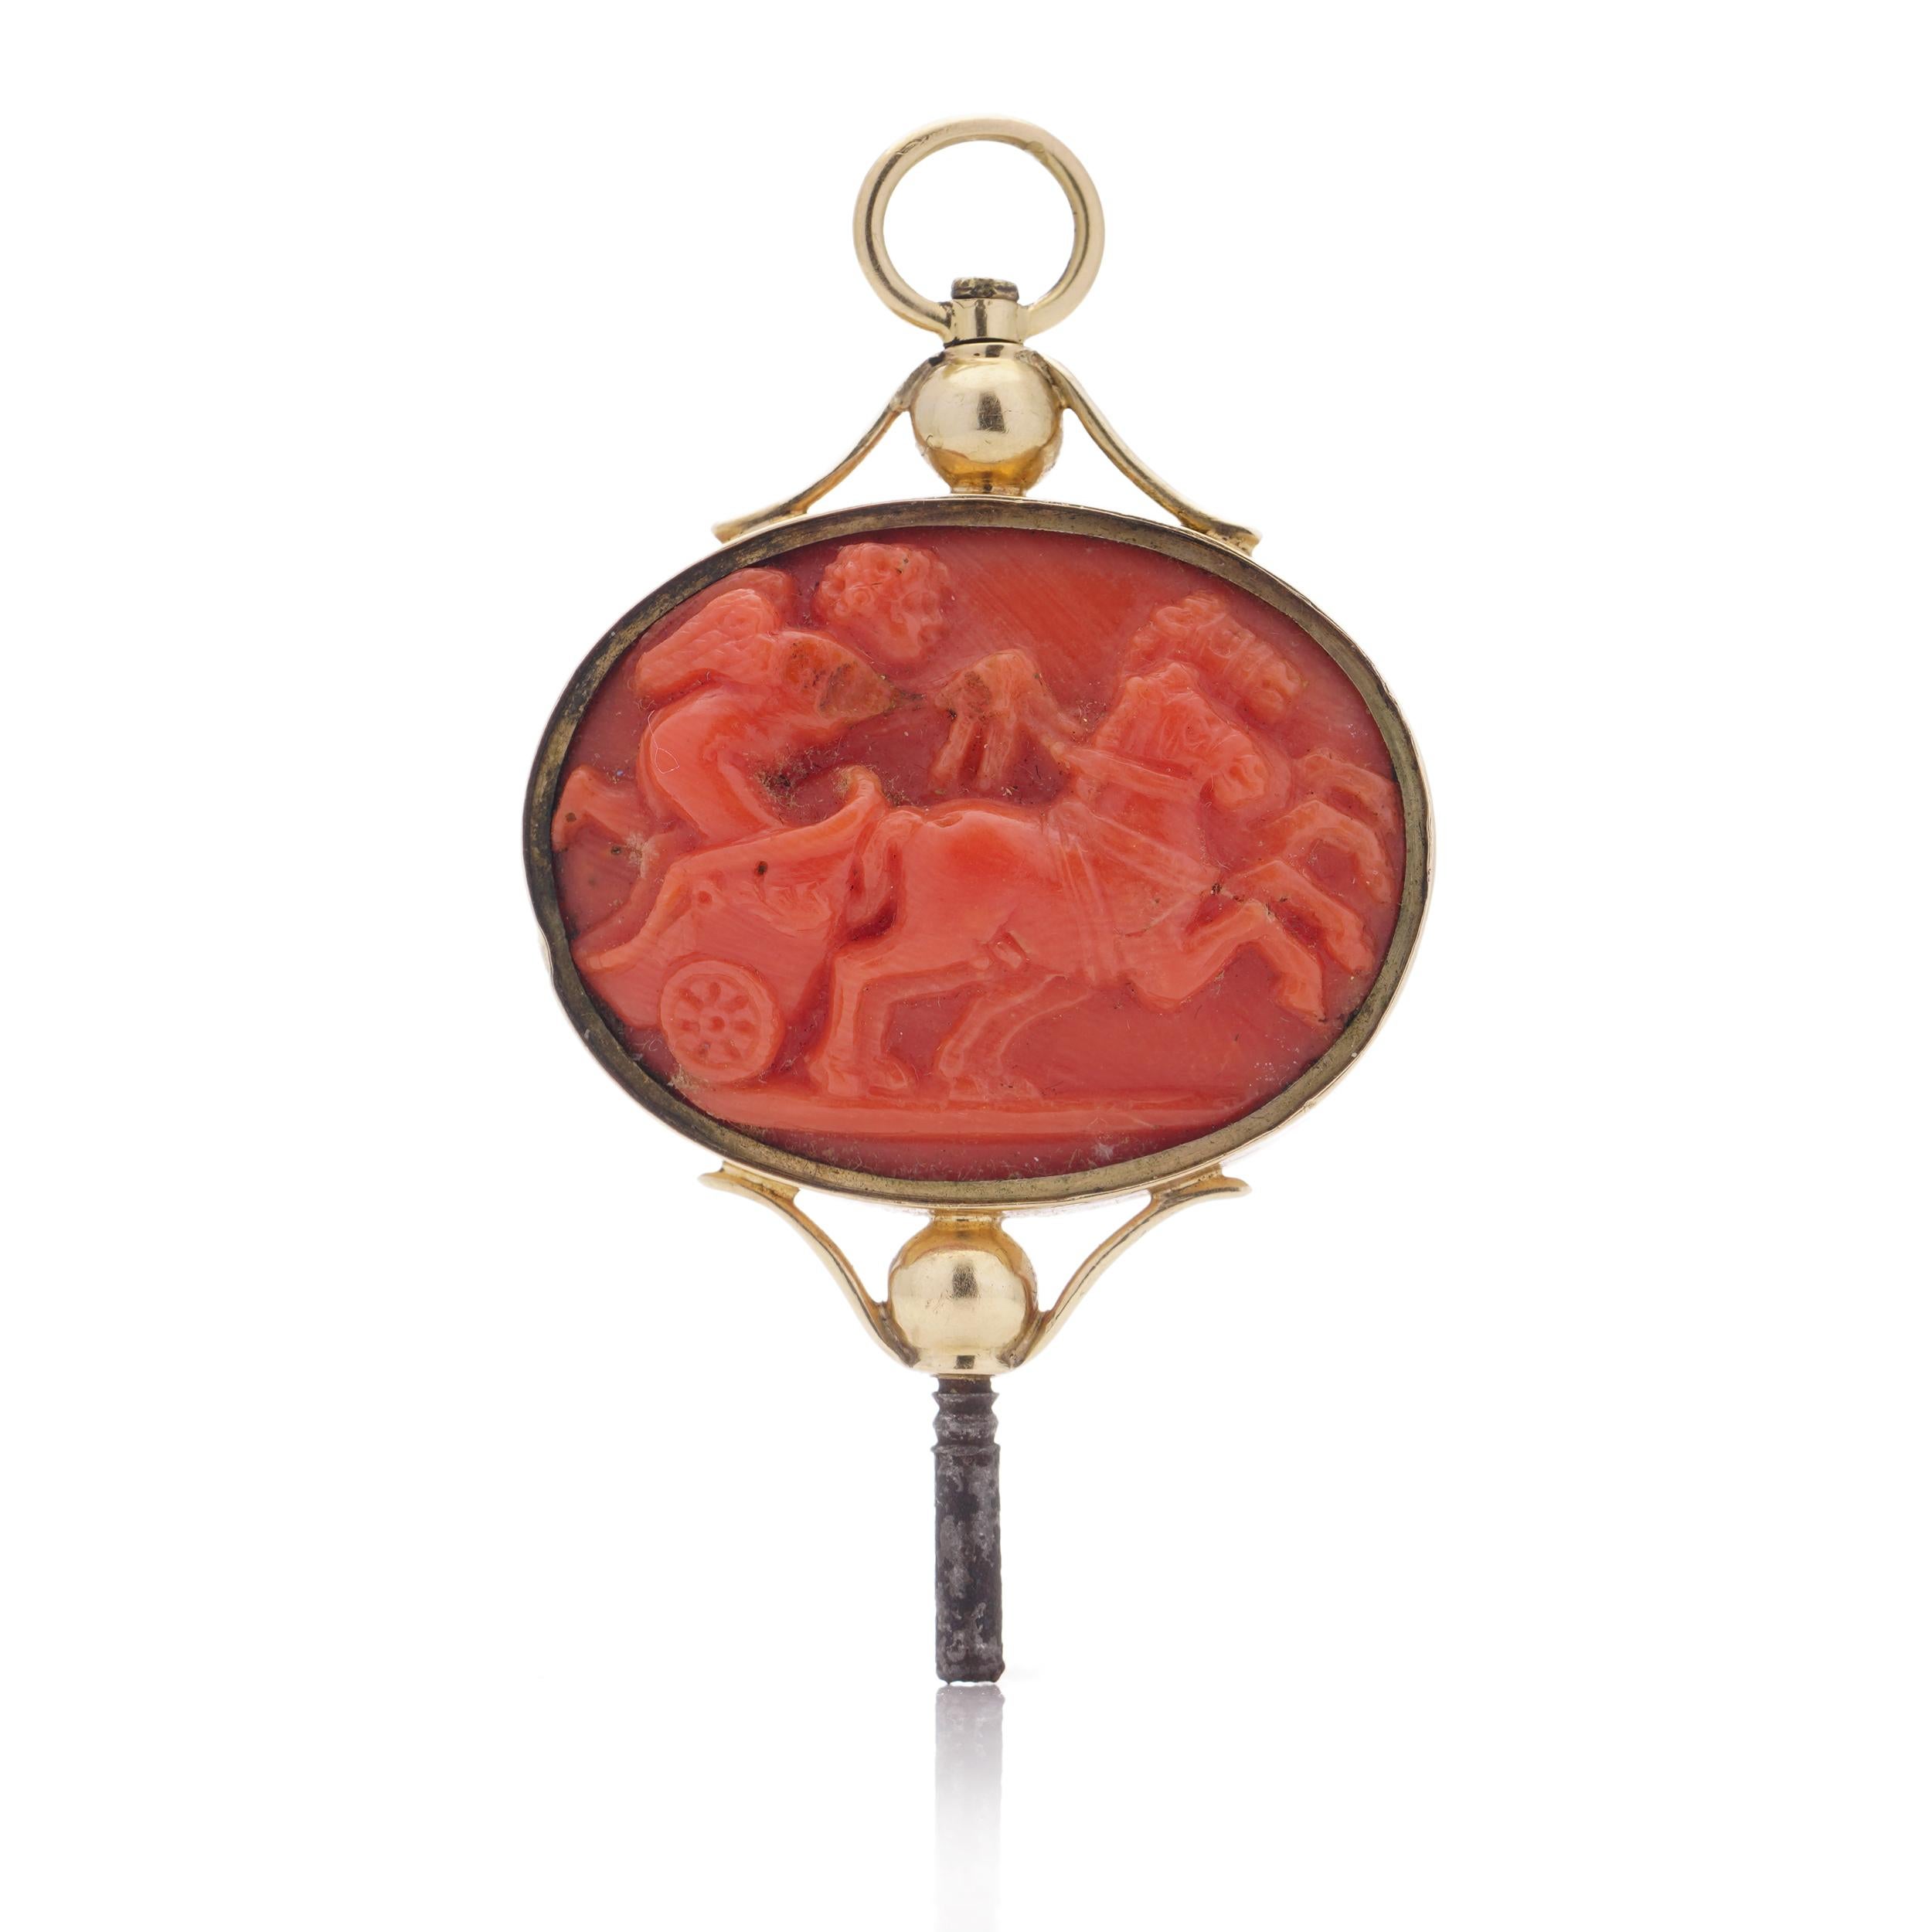 This exquisite Victorian pocket watch key/pendant is crafted from 18k yellow gold and adorned with a meticulously carved coral design. The pendant showcases neoclassical scenes on both sides, each depicting a captivating narrative. On one side, a